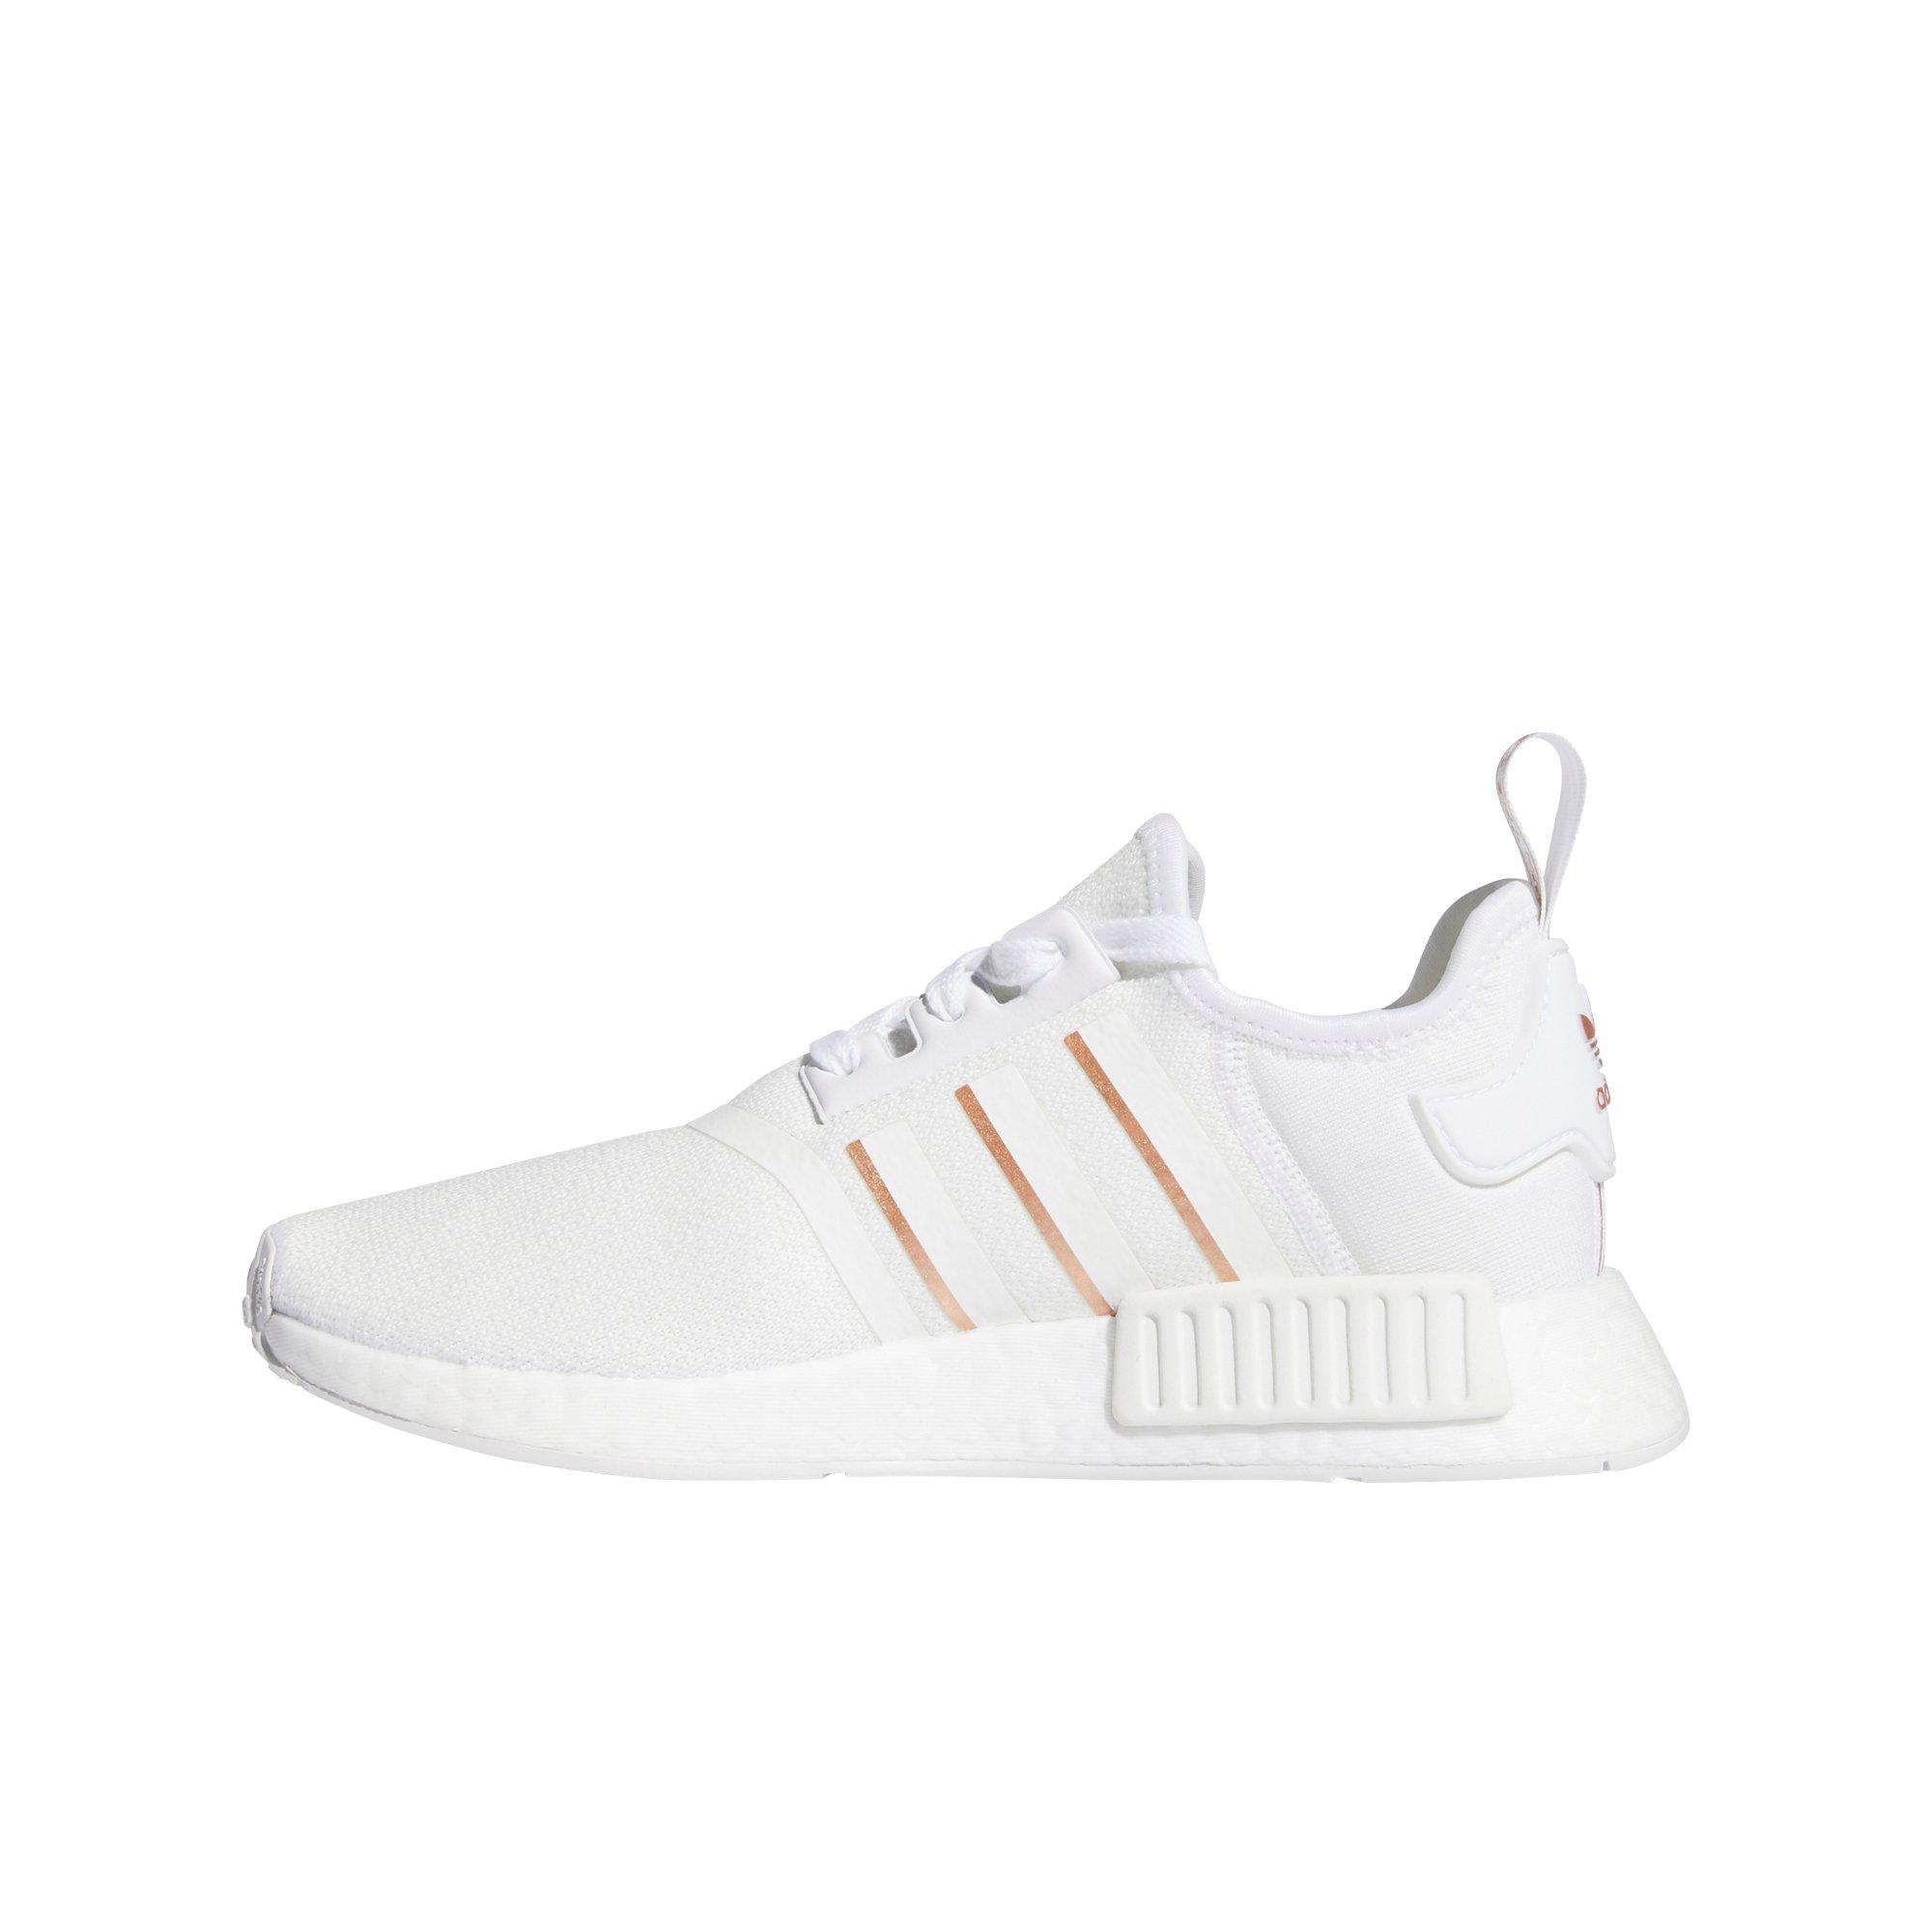 adidas women's rose gold sneakers